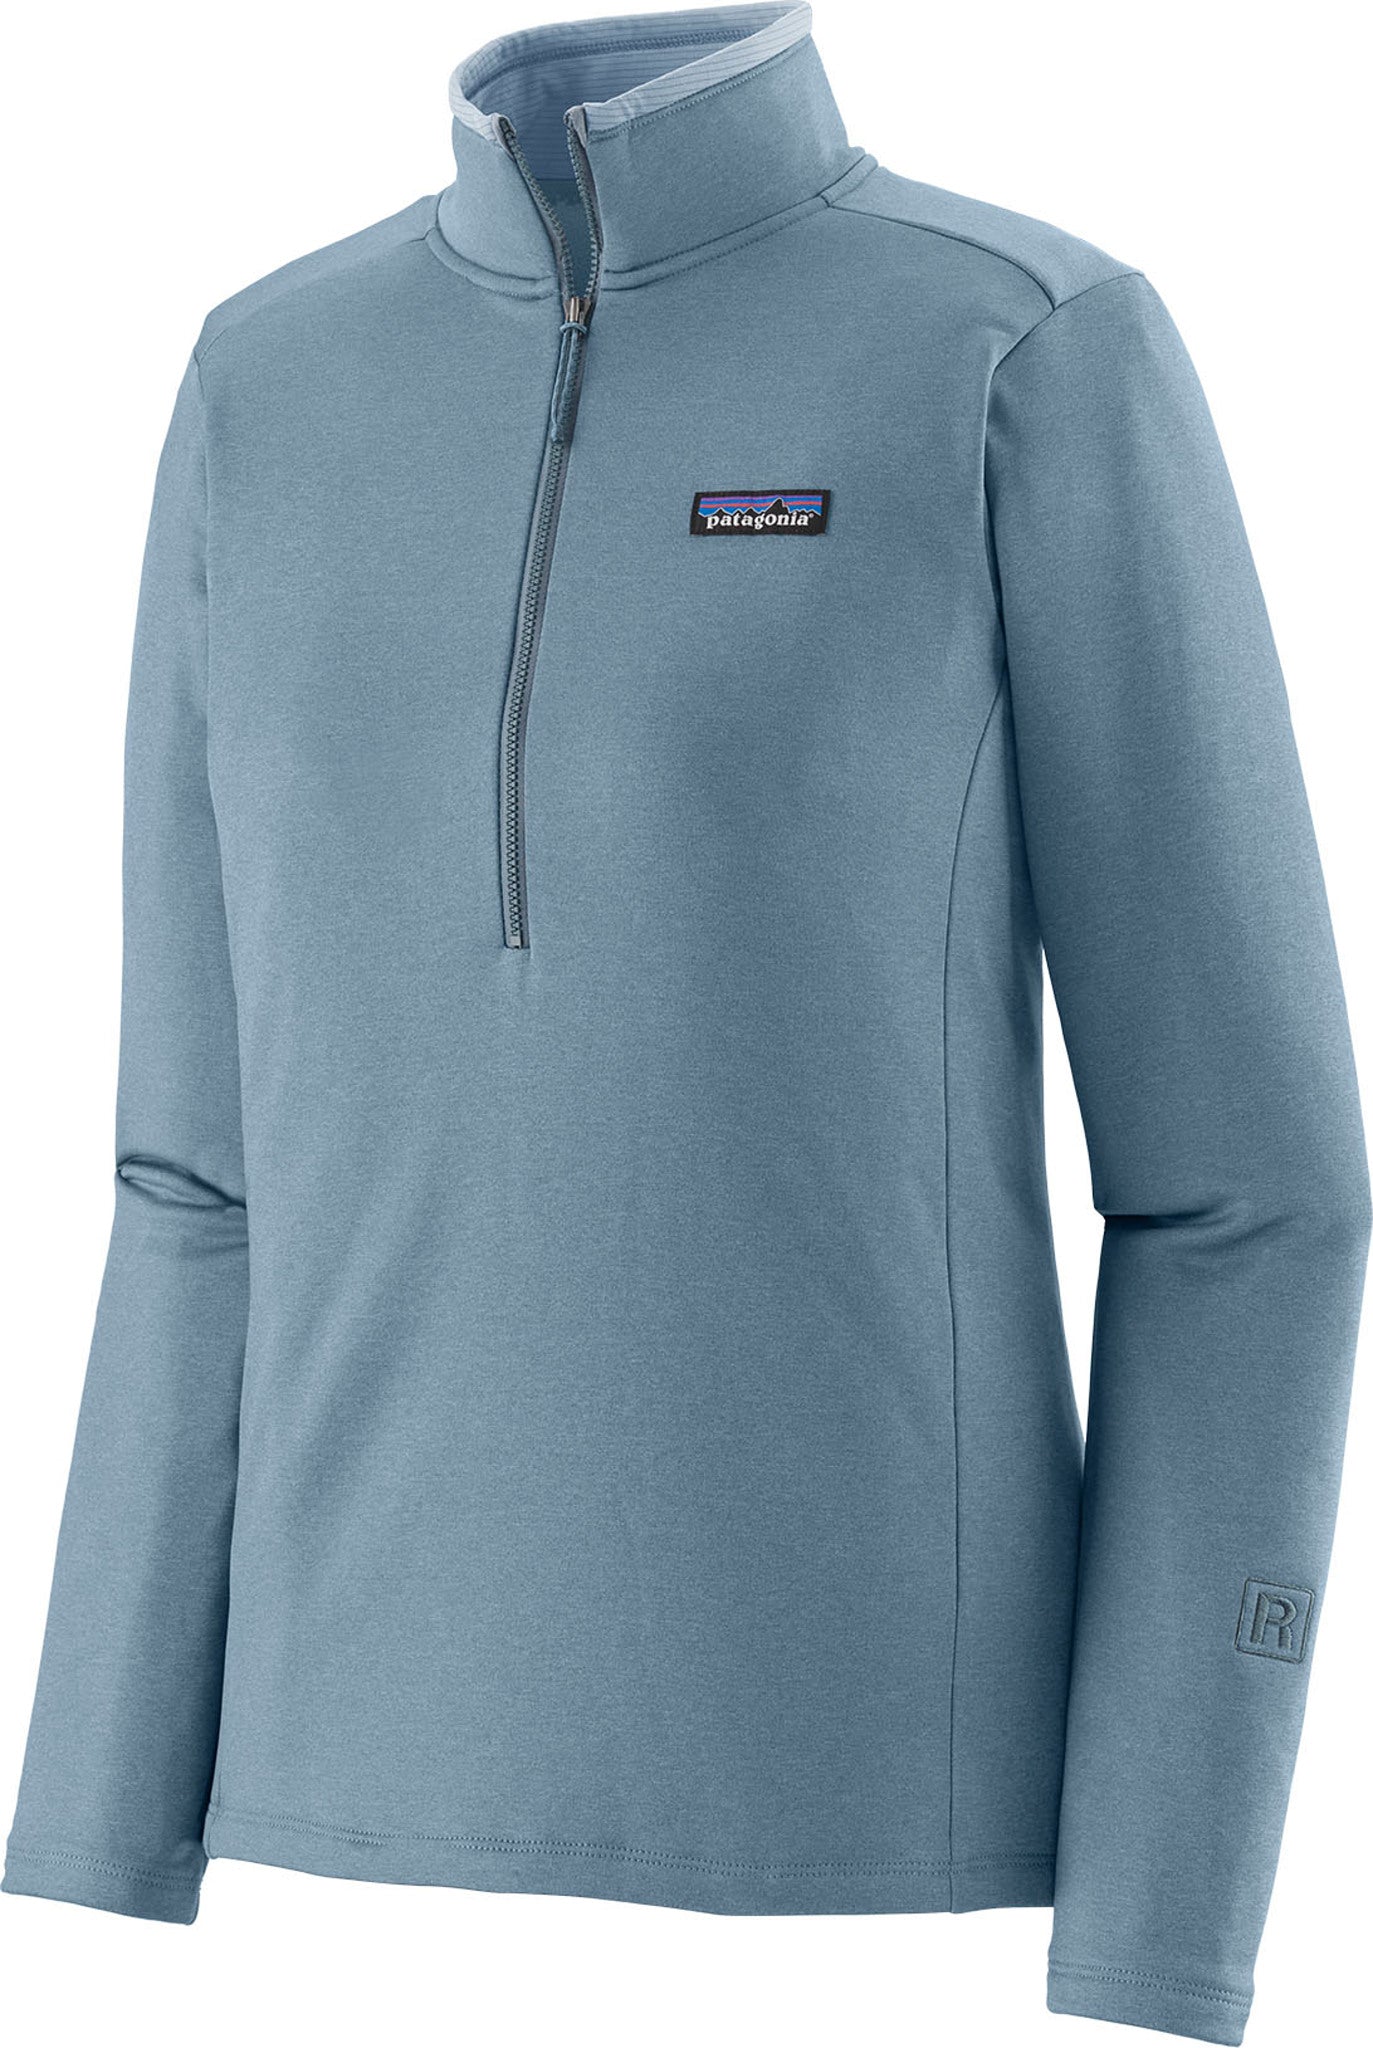 patagonia Mid-layer jacket R1® DAILY in dark gray